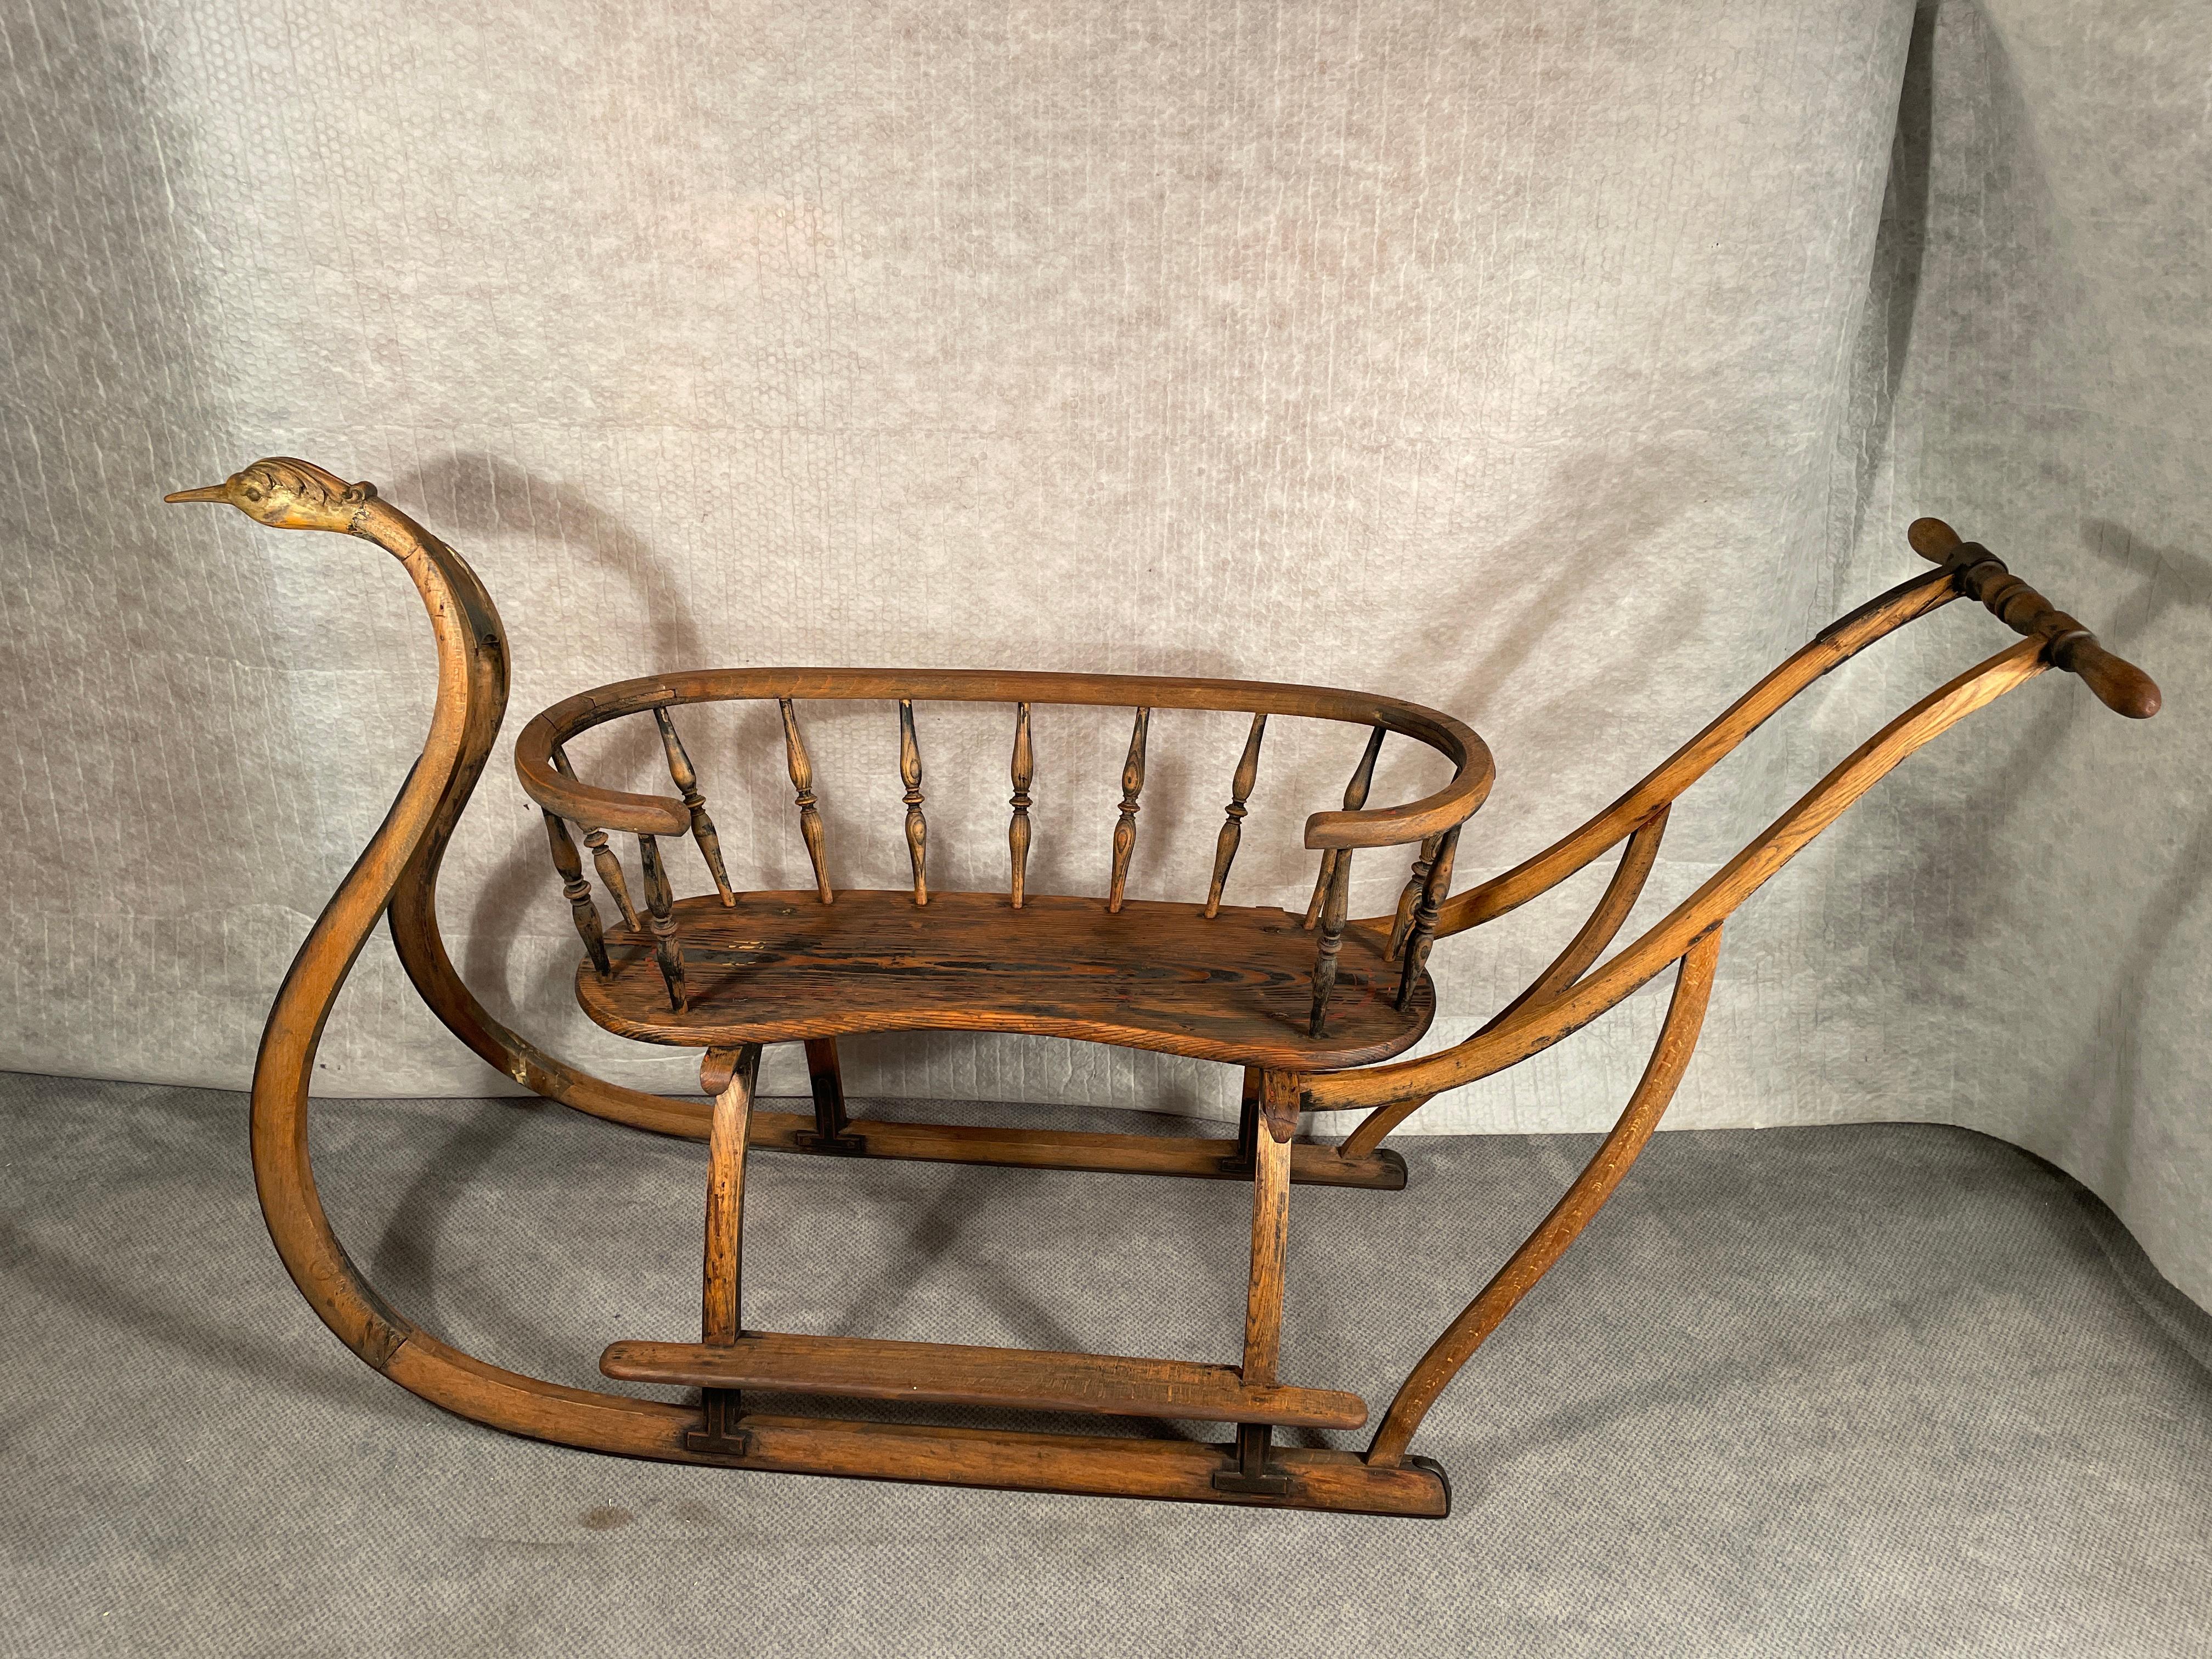 Very rare antique sled coming from Switzerland and dating back to the first half of the 19th century. 
The wooden sled shows some remaining color and gilding. The curved skids are decorated at the front end with a naturalistically hand-carved